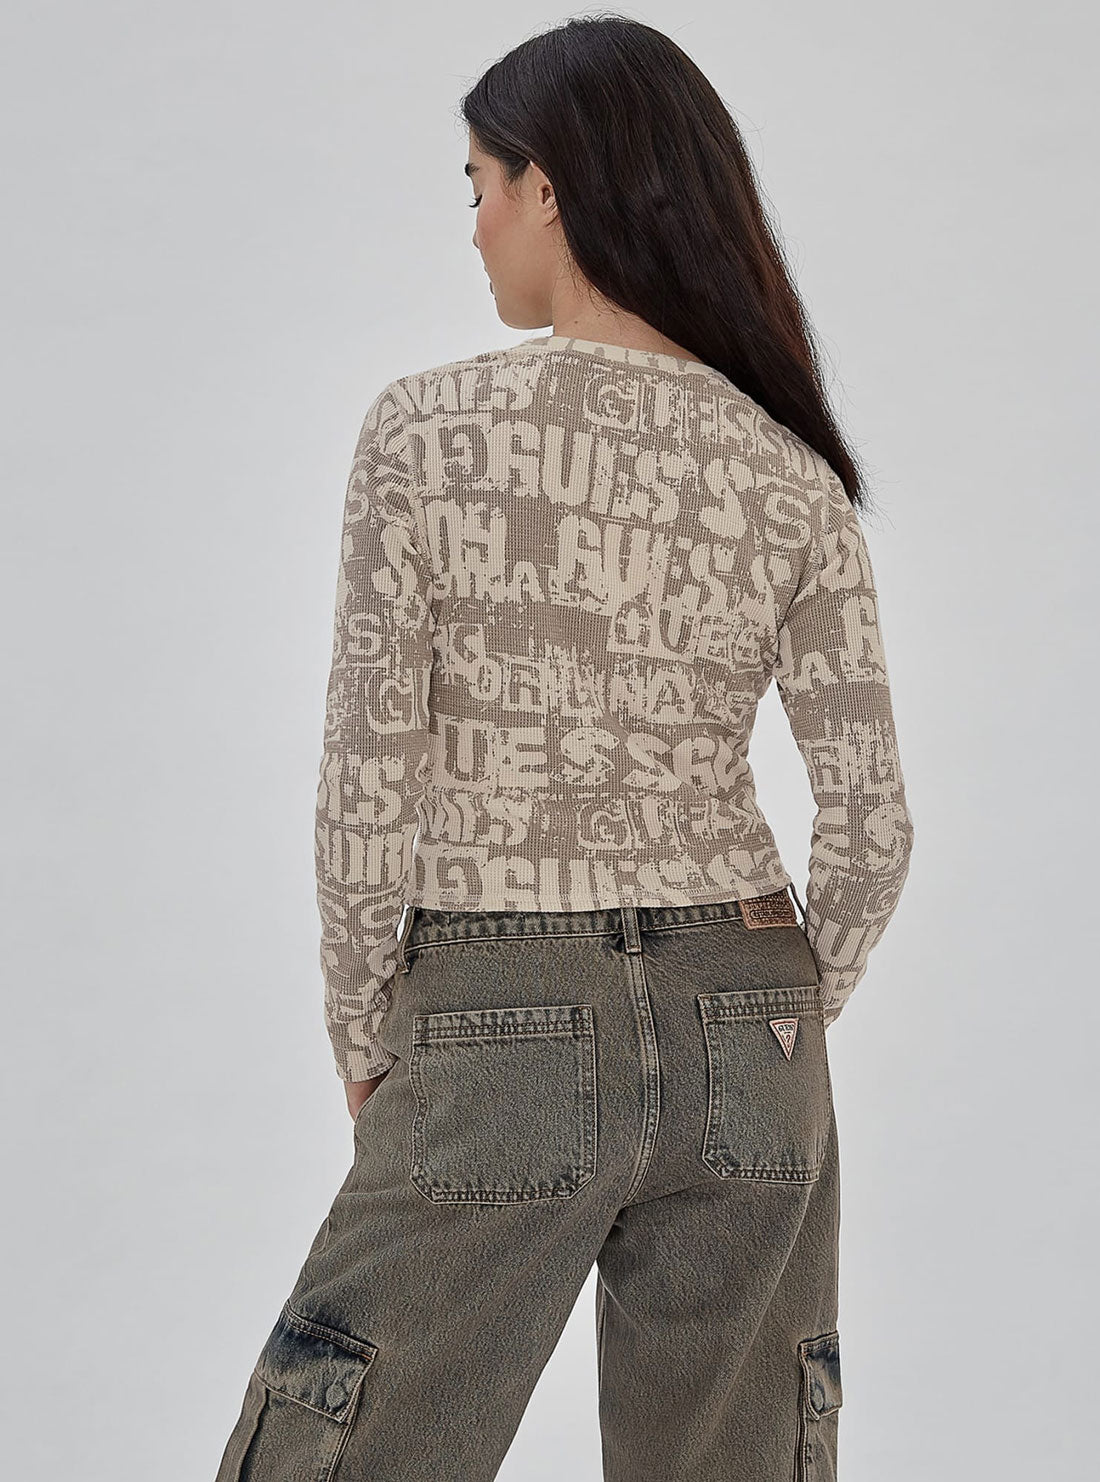 GUESS Guess Originals Beige Waffle Knit Top back view